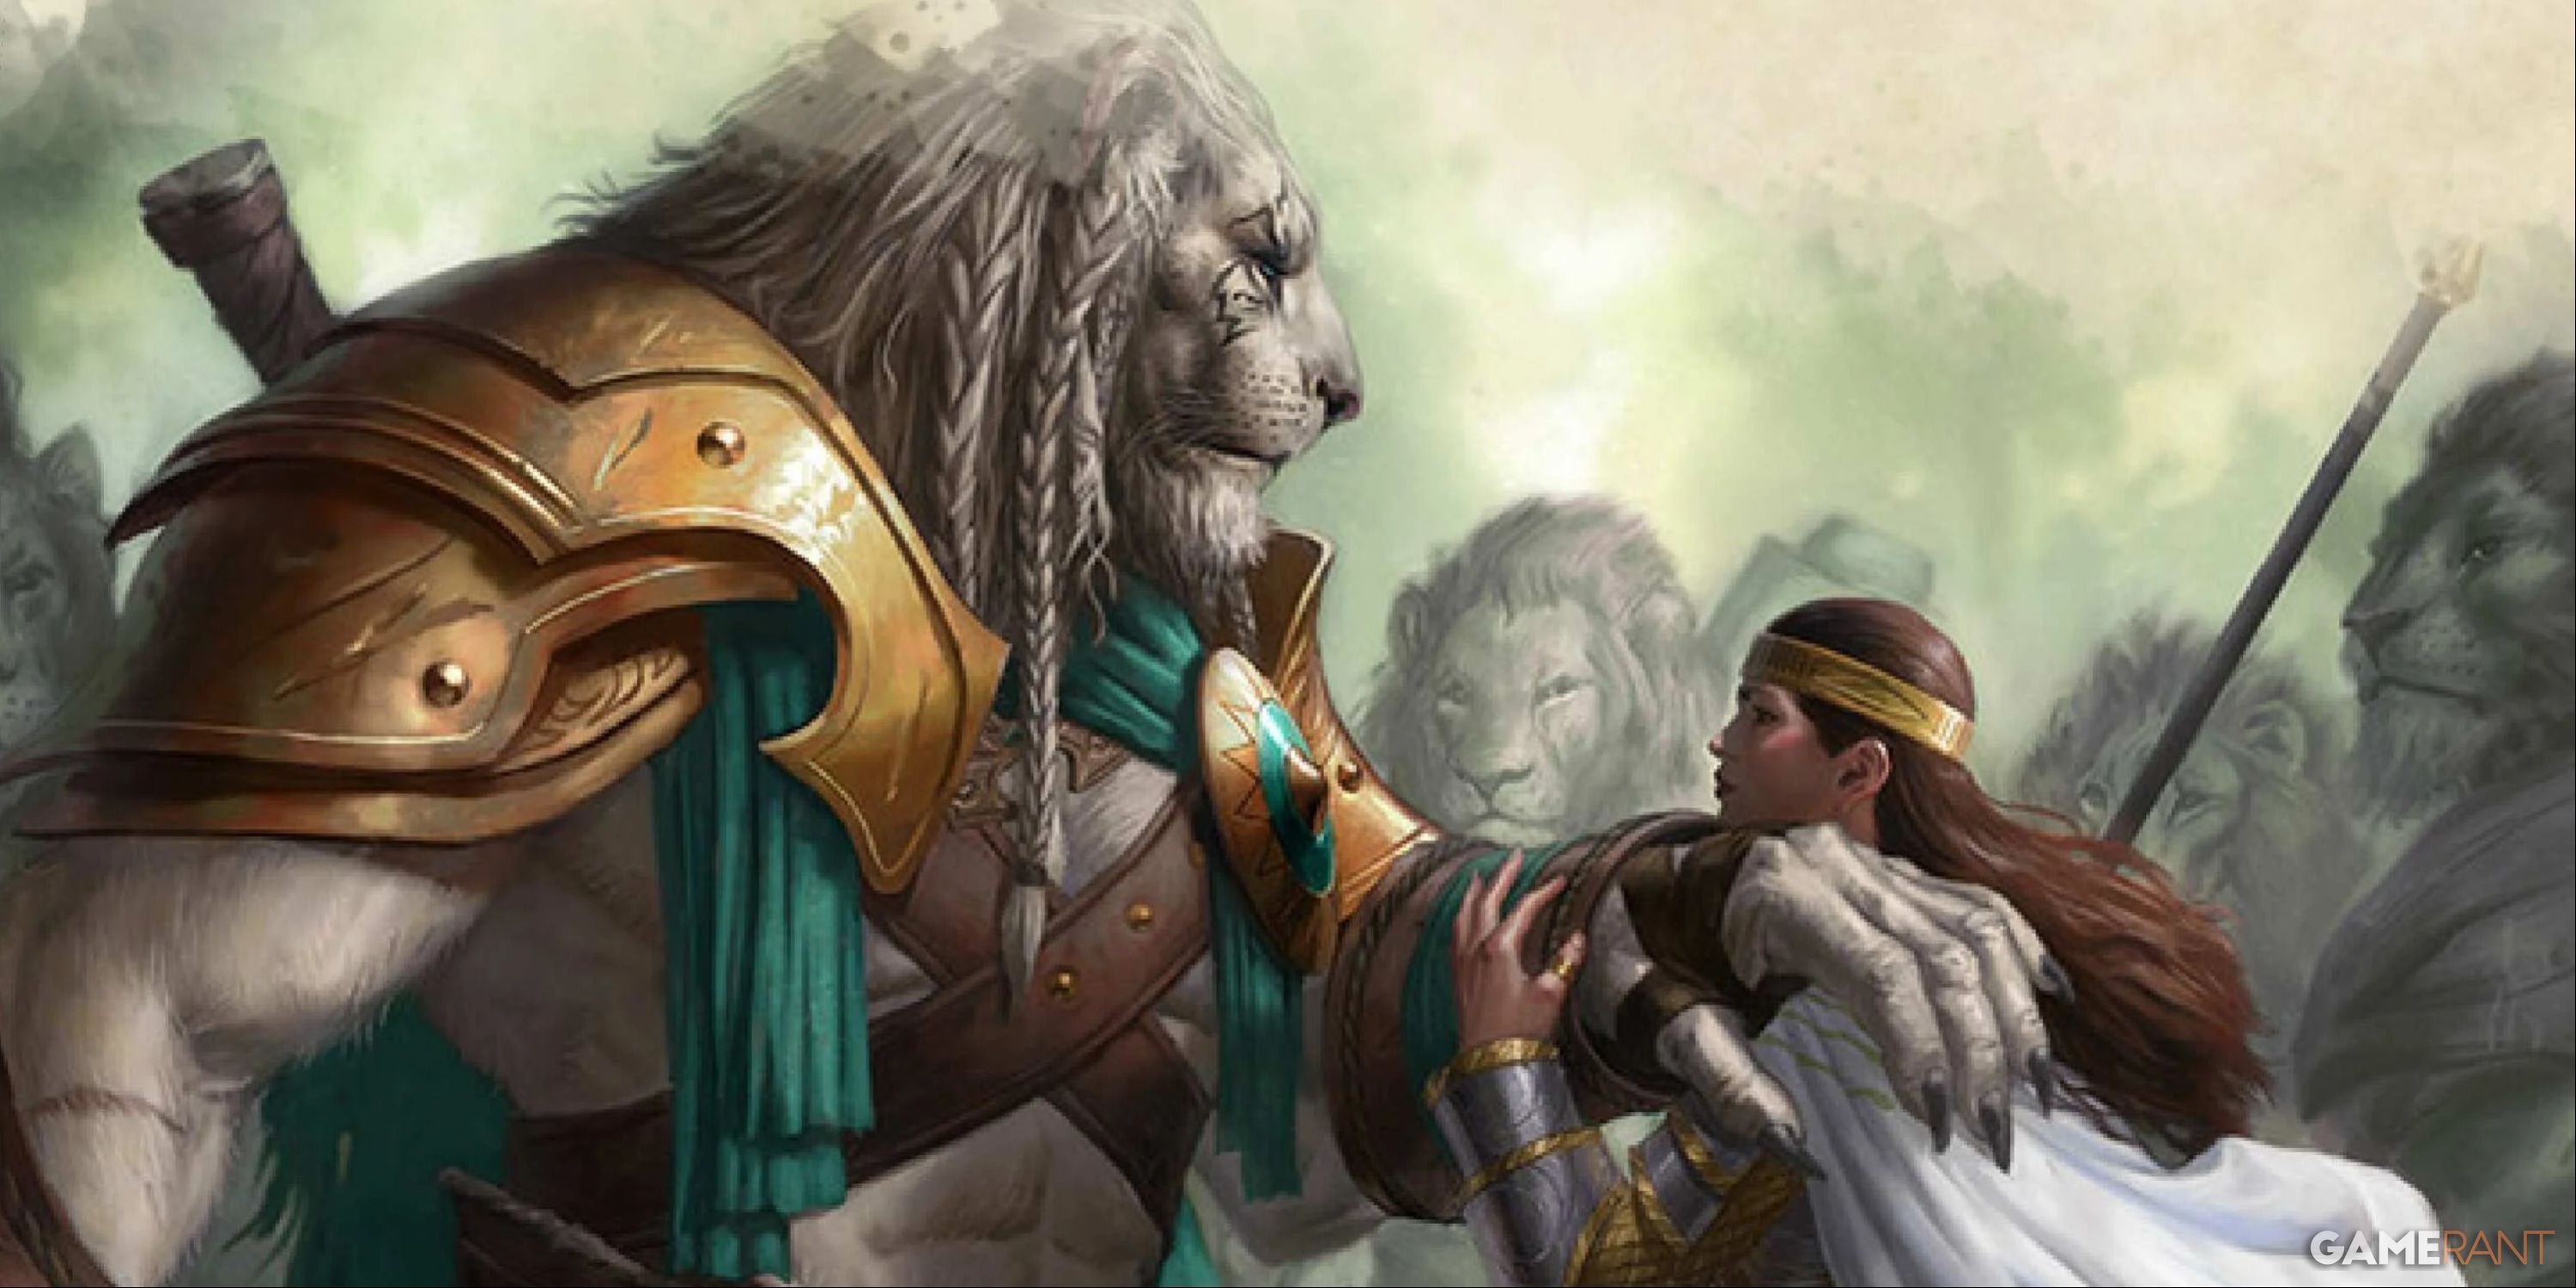 leonin and human companion official WoC artwork from Mystic Odyseys of Theros